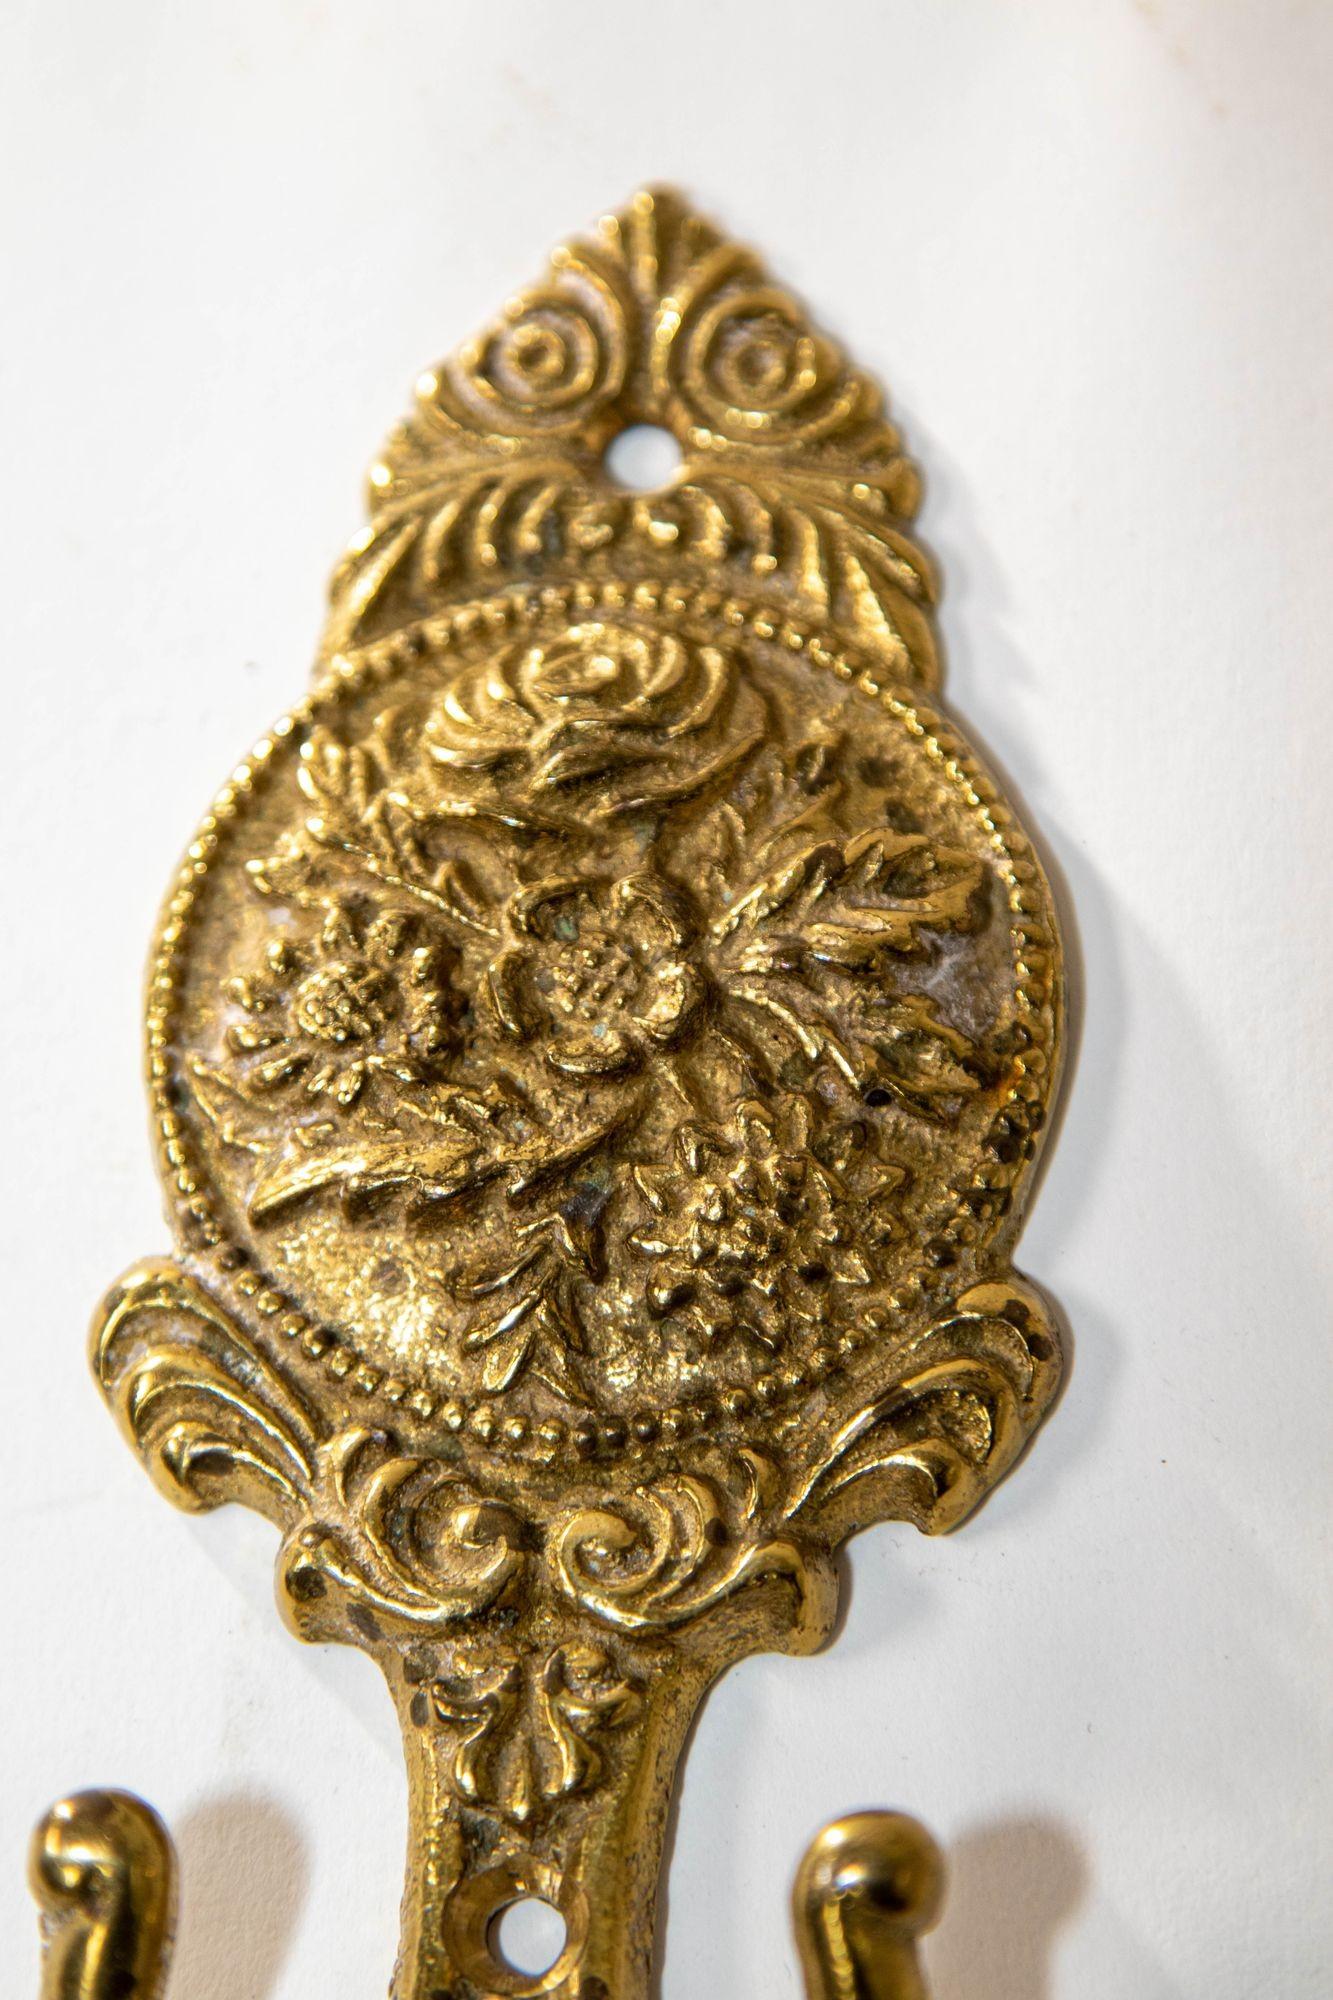 Architectural French Cast Brass Floral Wall Hook Decor.
Mid-20th century Baroque Louis XIV style wall cast brass double hook wall plate featuring an intricate floral pattern with roses and
leaves, in relief.
The hook is fastened to a shaped